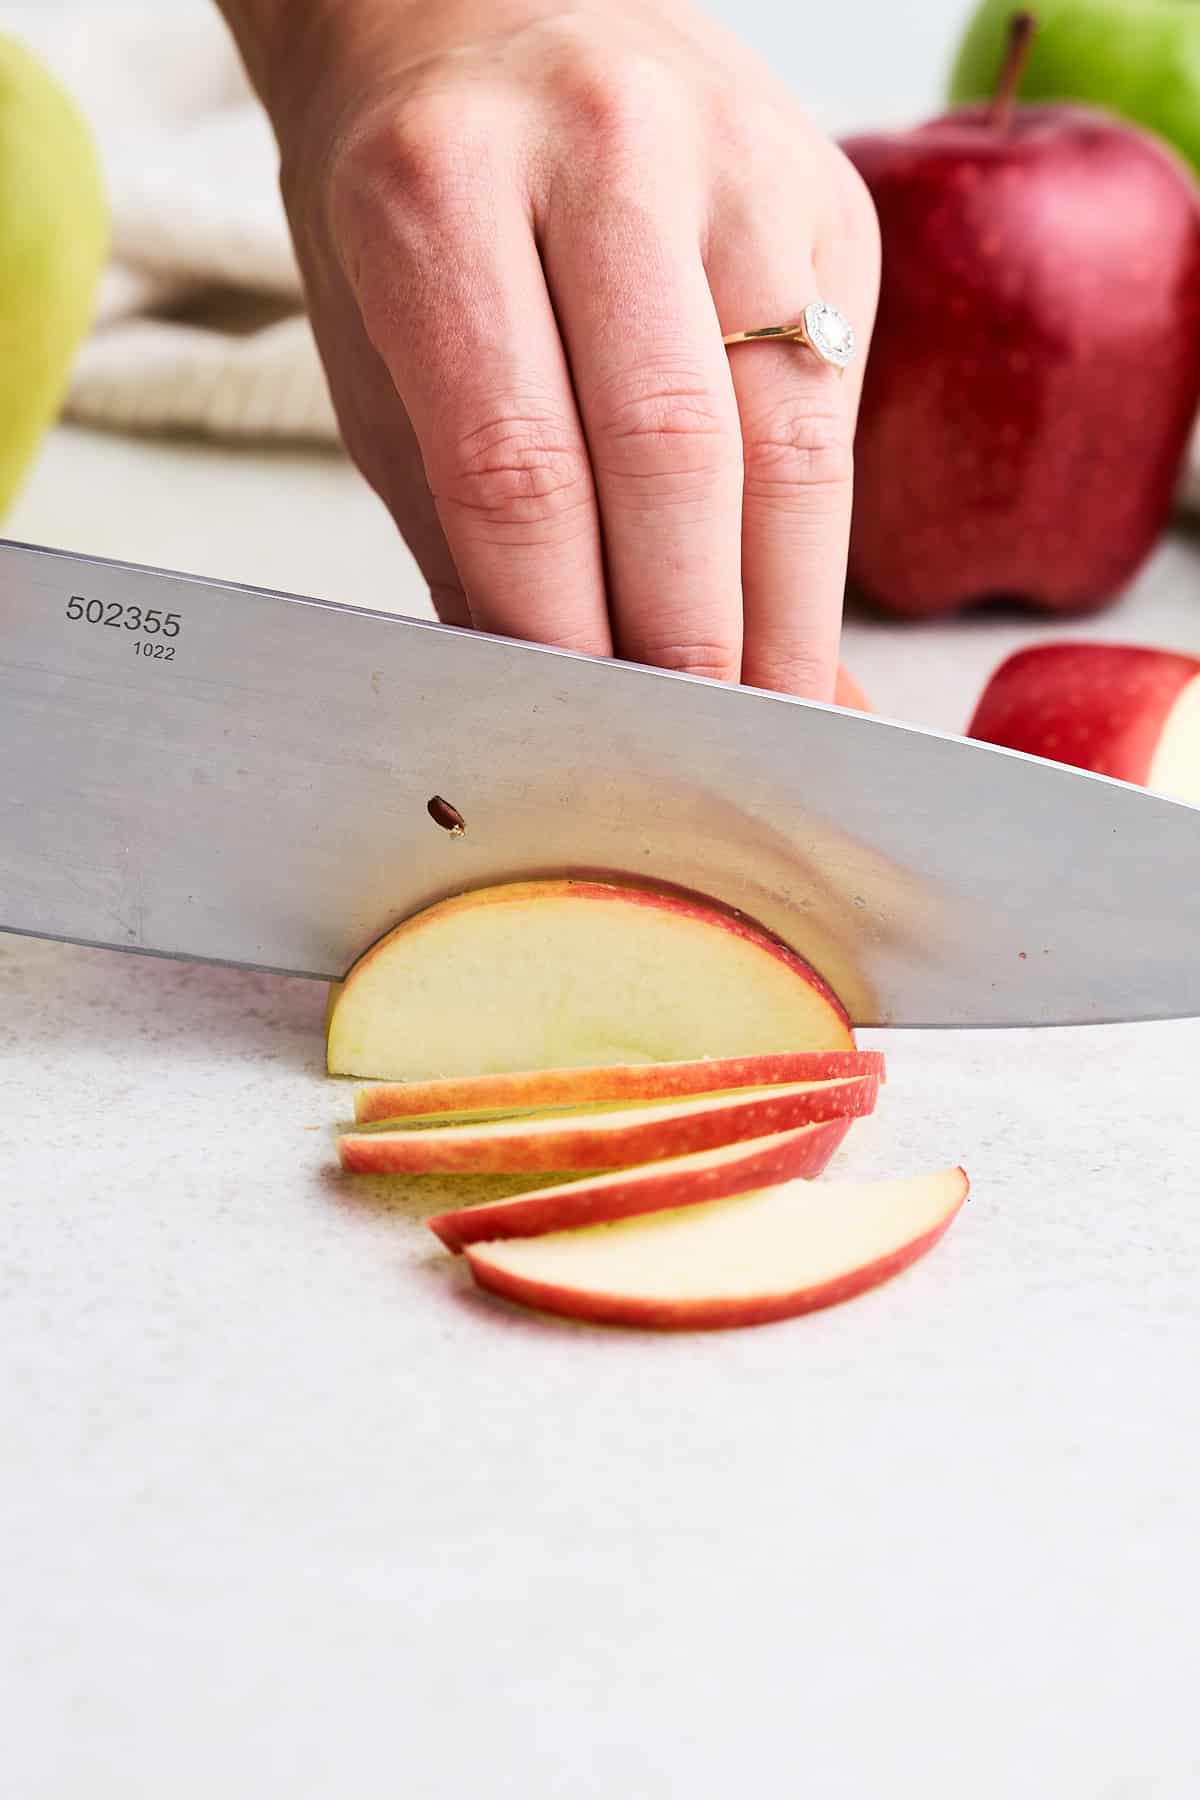 slicing an apple wedge into thin slices.